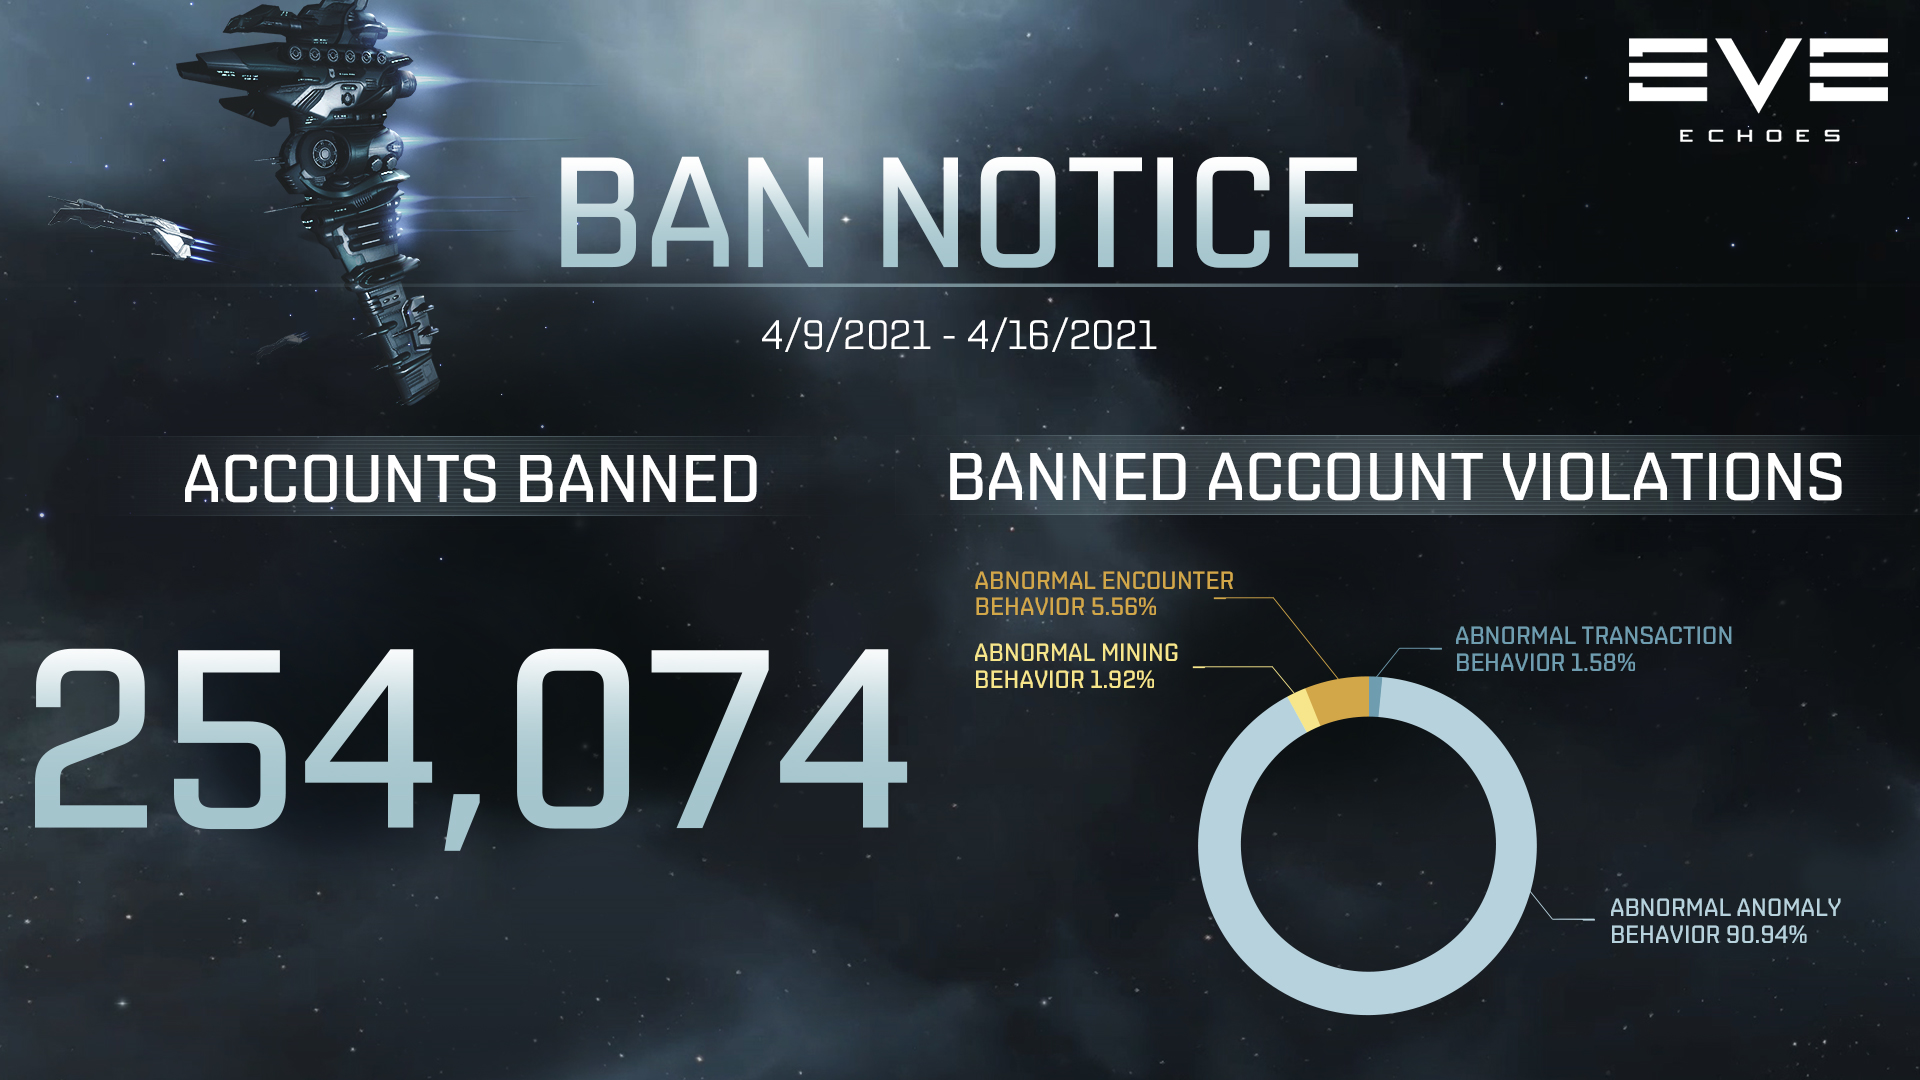 Ban Notice for 04/09-04/16